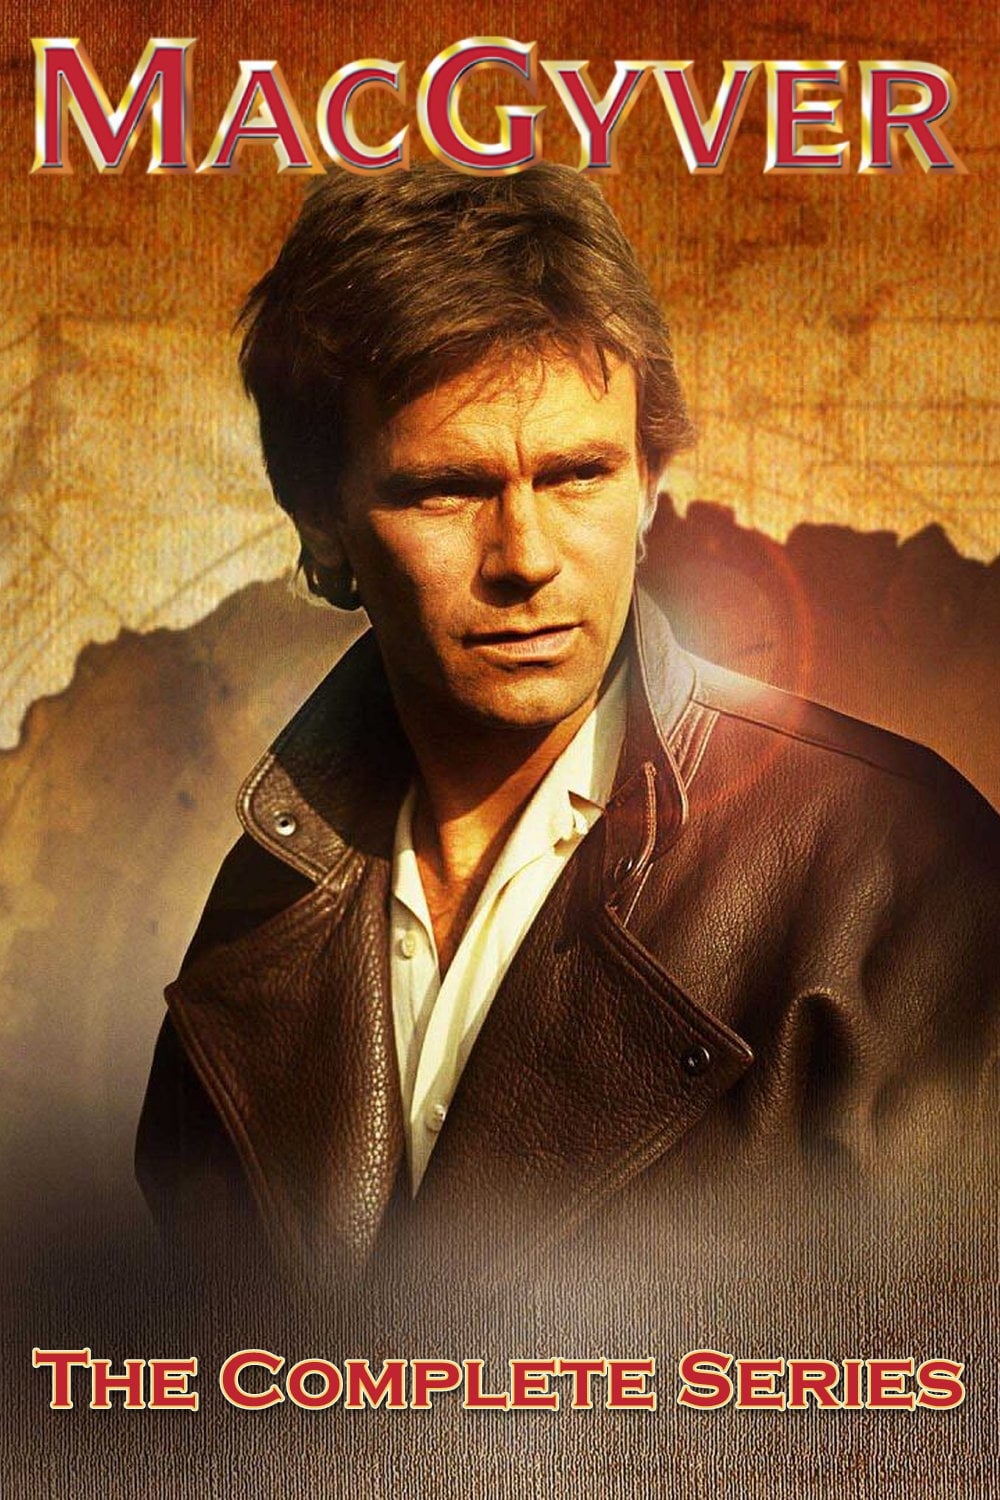 MacGyver TV Shows About One Man Army